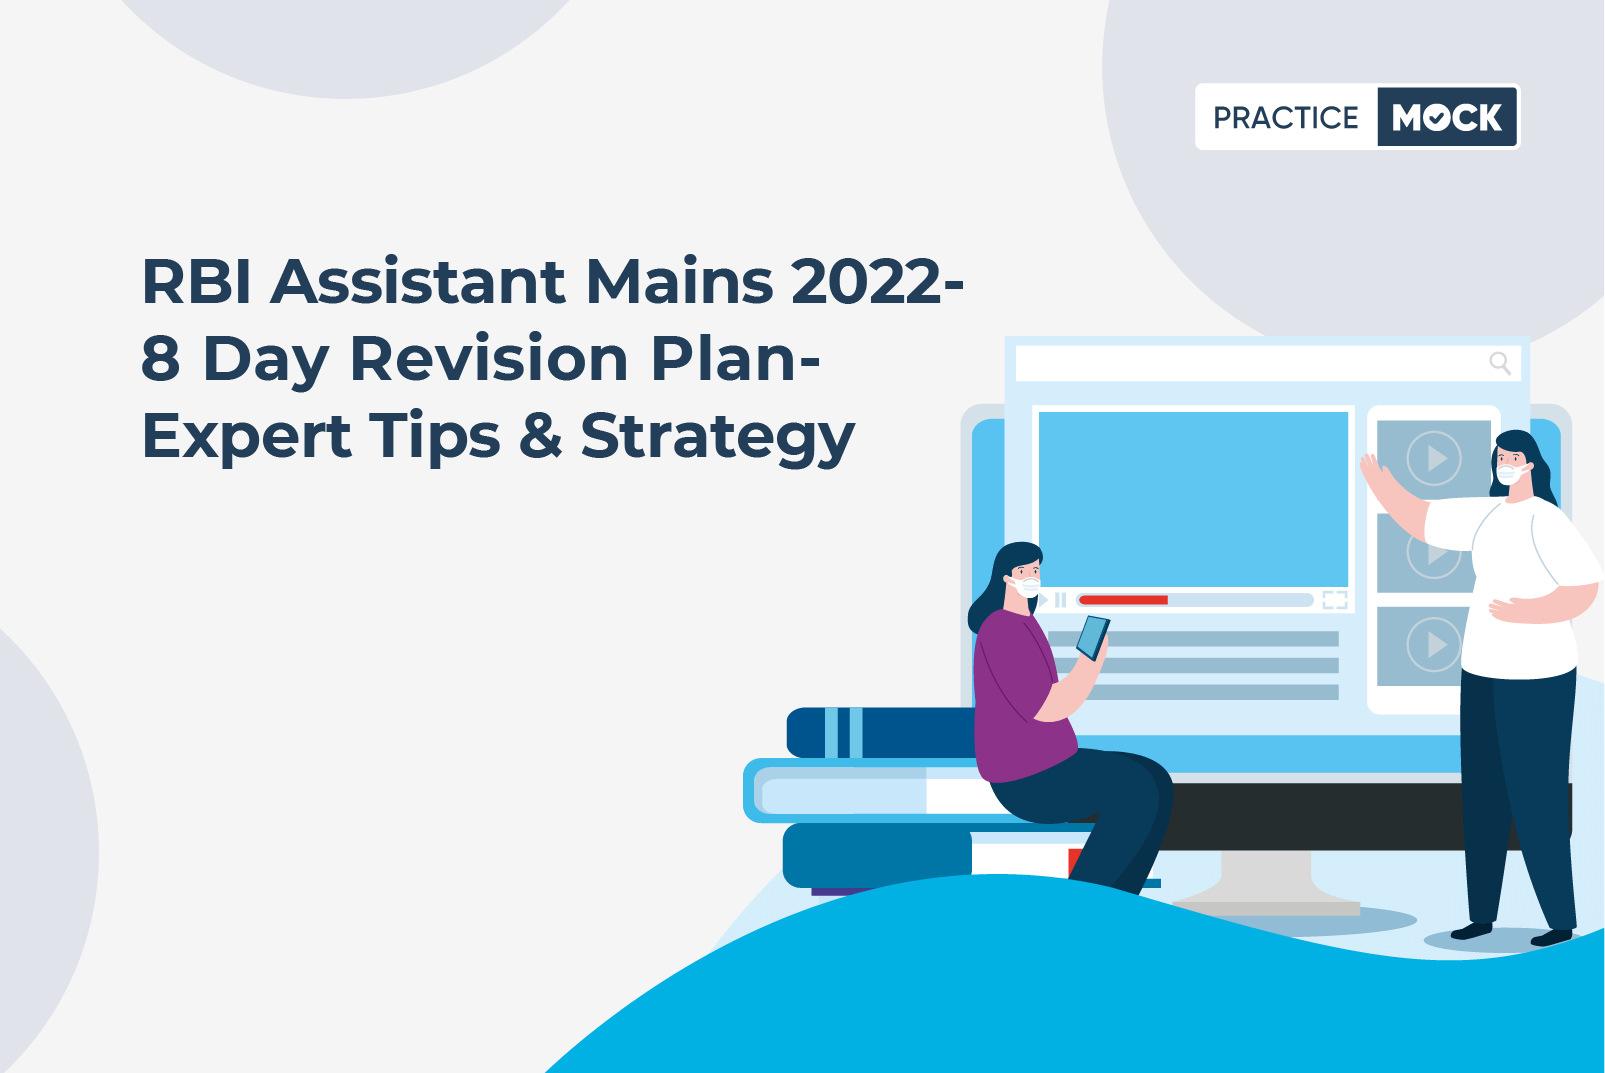 RBI Assistant Mains 2022-8 Day Revision Plan-Expert Tips & Strategy